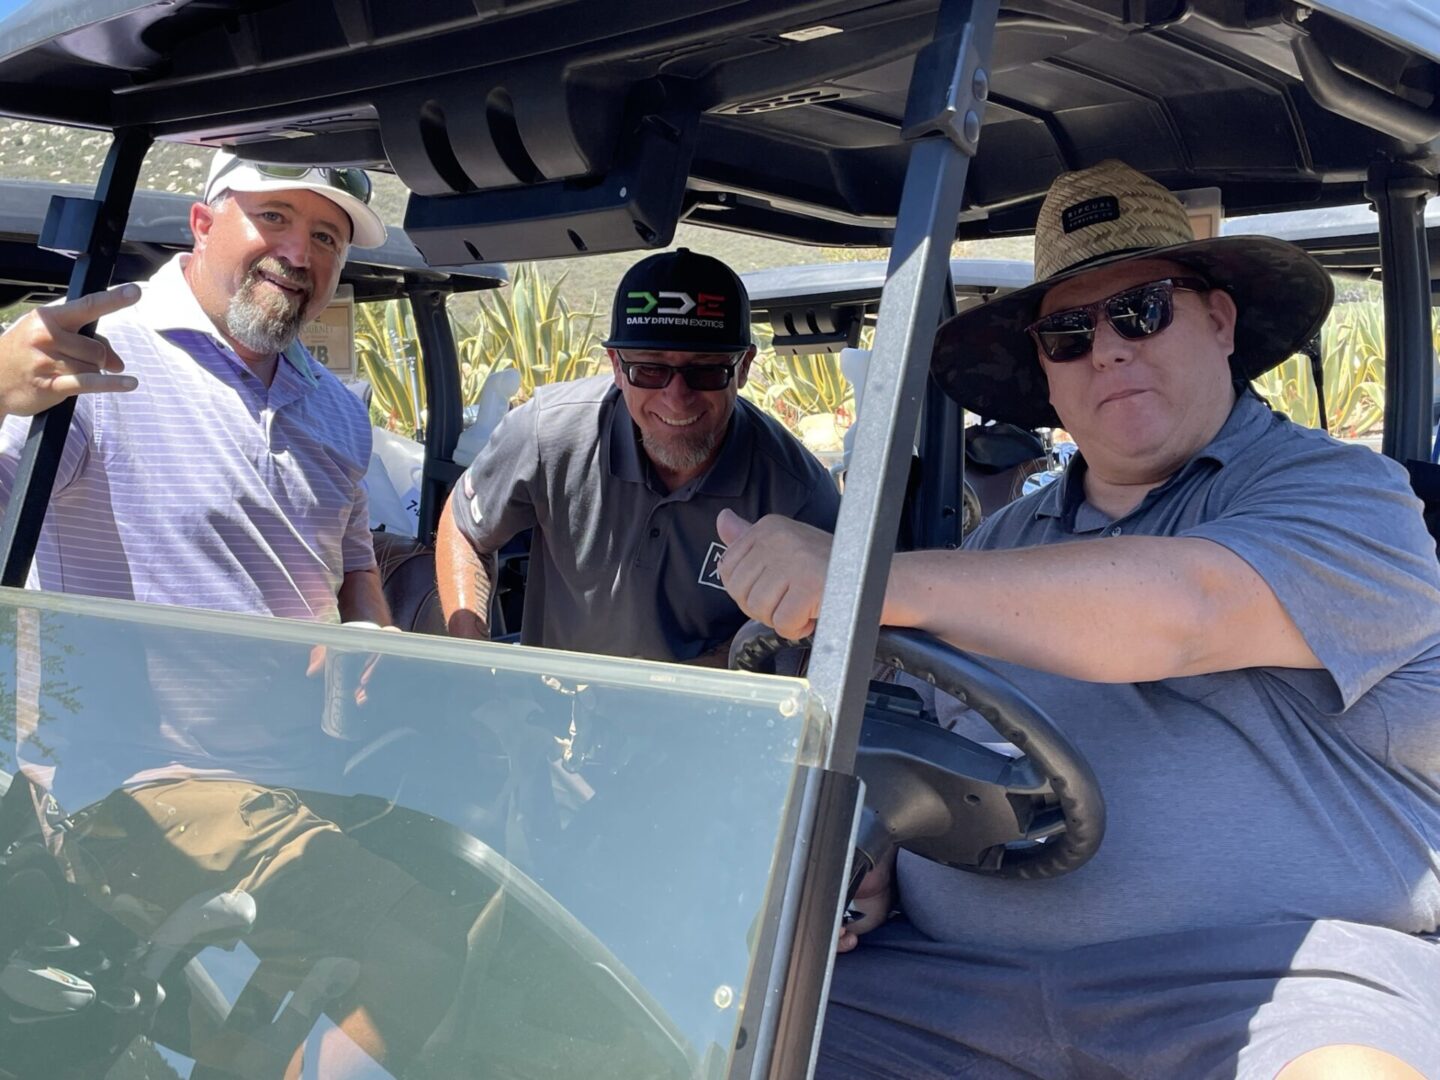 Team of Three Golfers Posing with Golf Cart for Photo